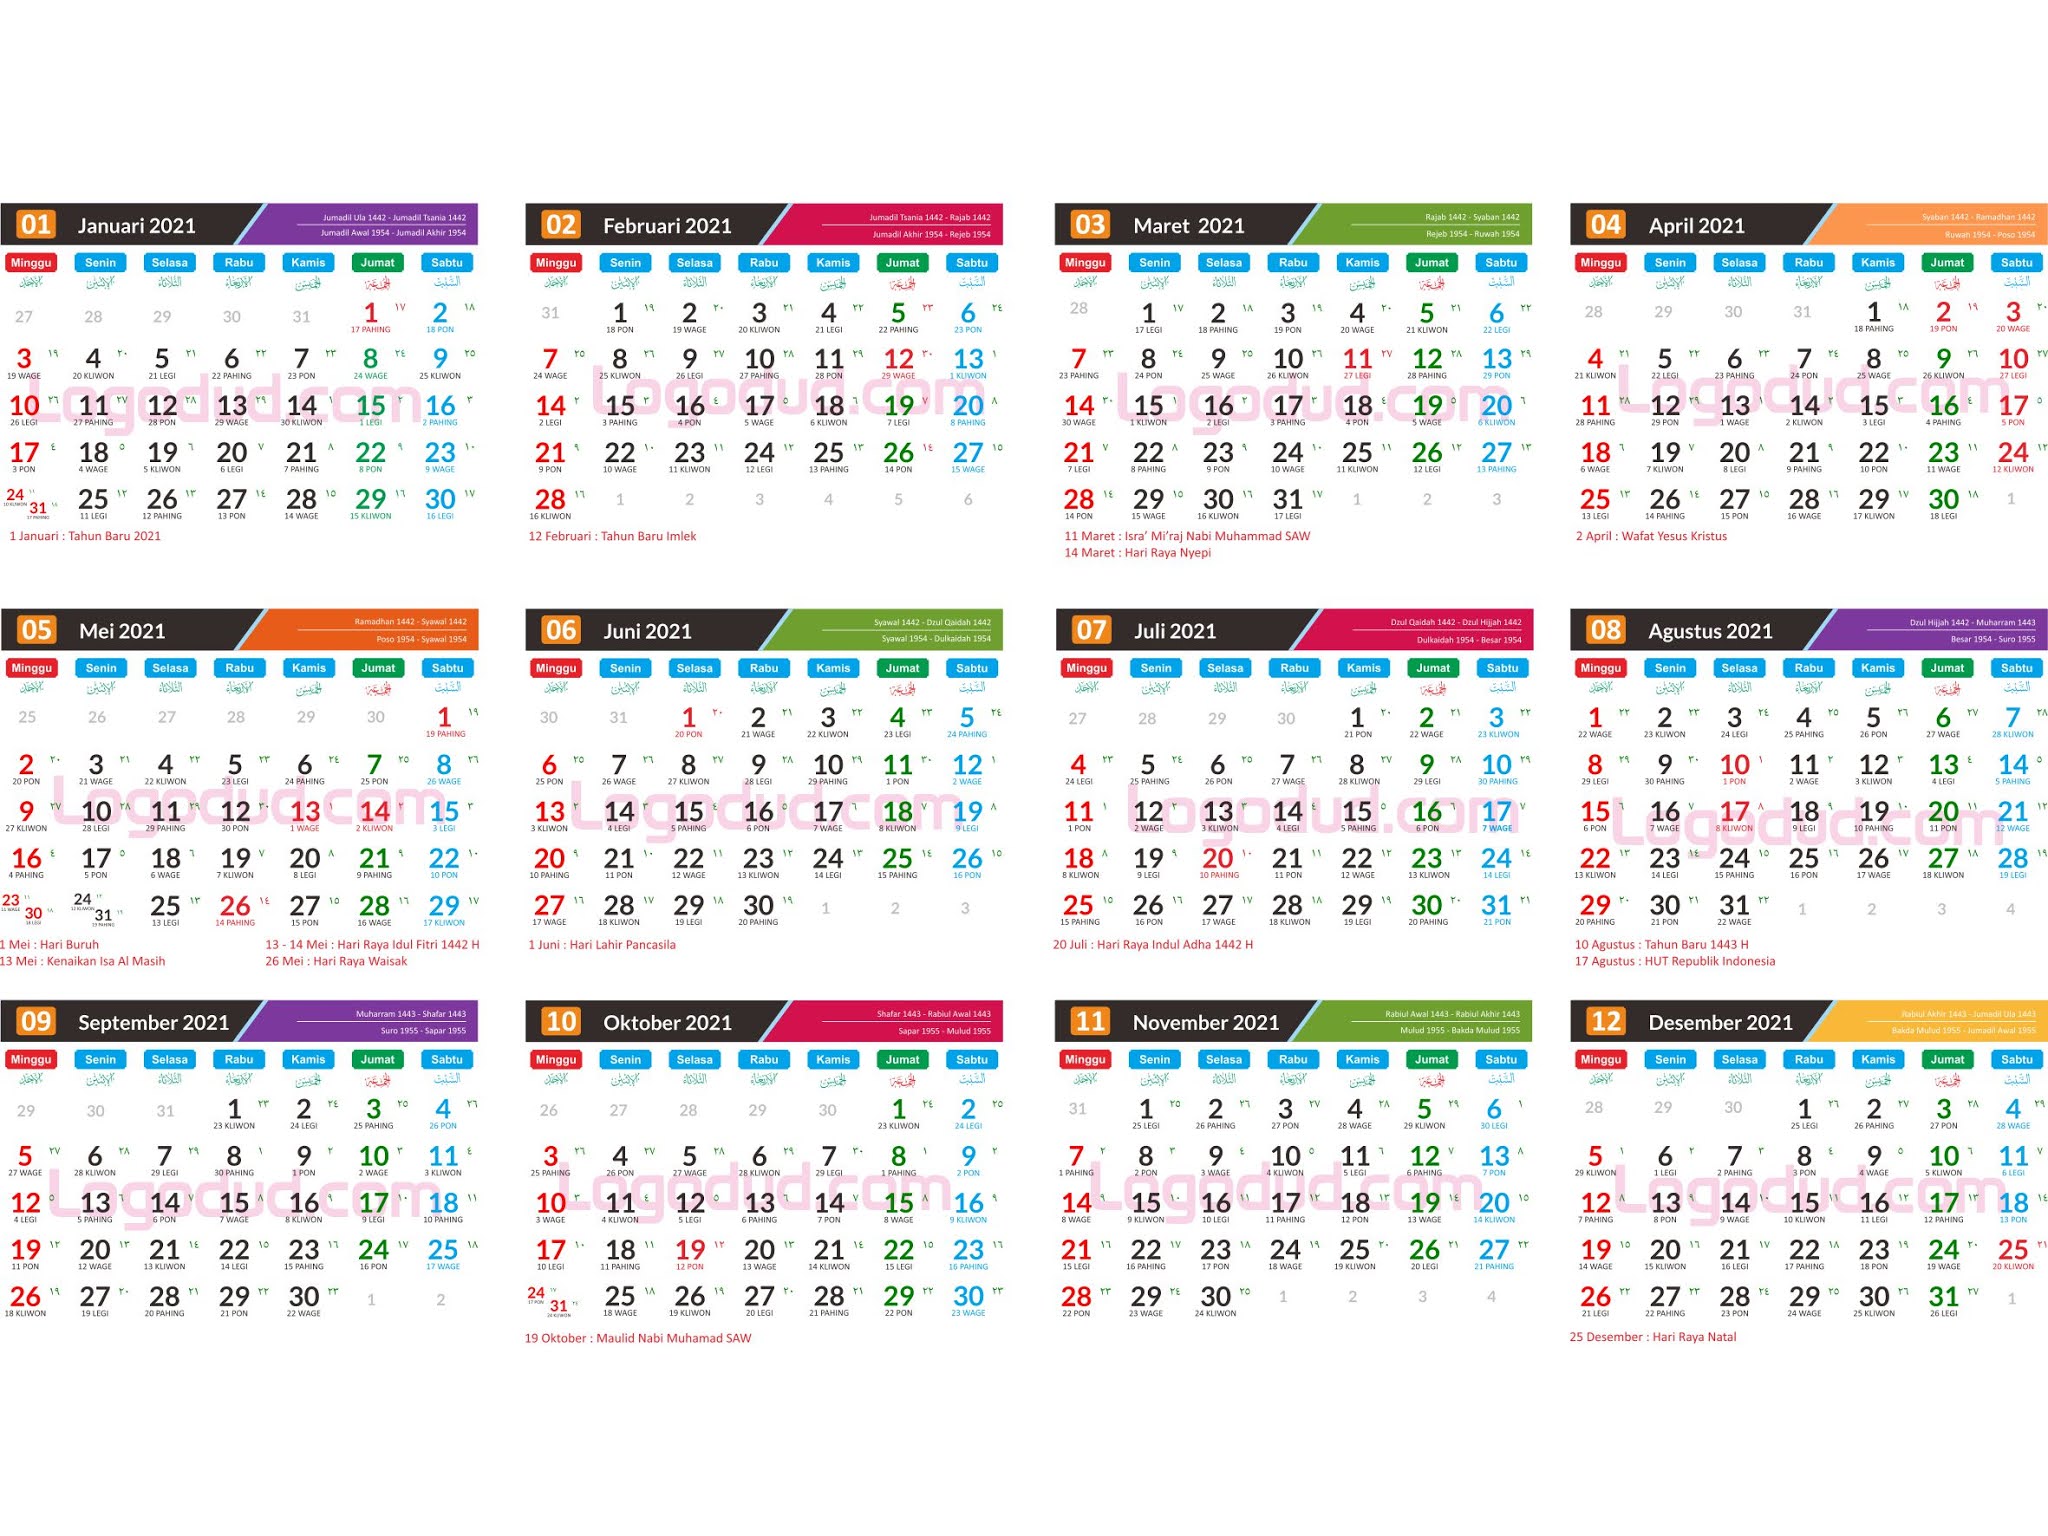 Kalender Nasional Jawa Islam 2021 Format Cdr Ai Eps Logodud Format Cdr Png Ai Eps Download your search result mp3, or mp4 file on your mobile, tablet, or pc. jawa islam 2021 format cdr ai eps